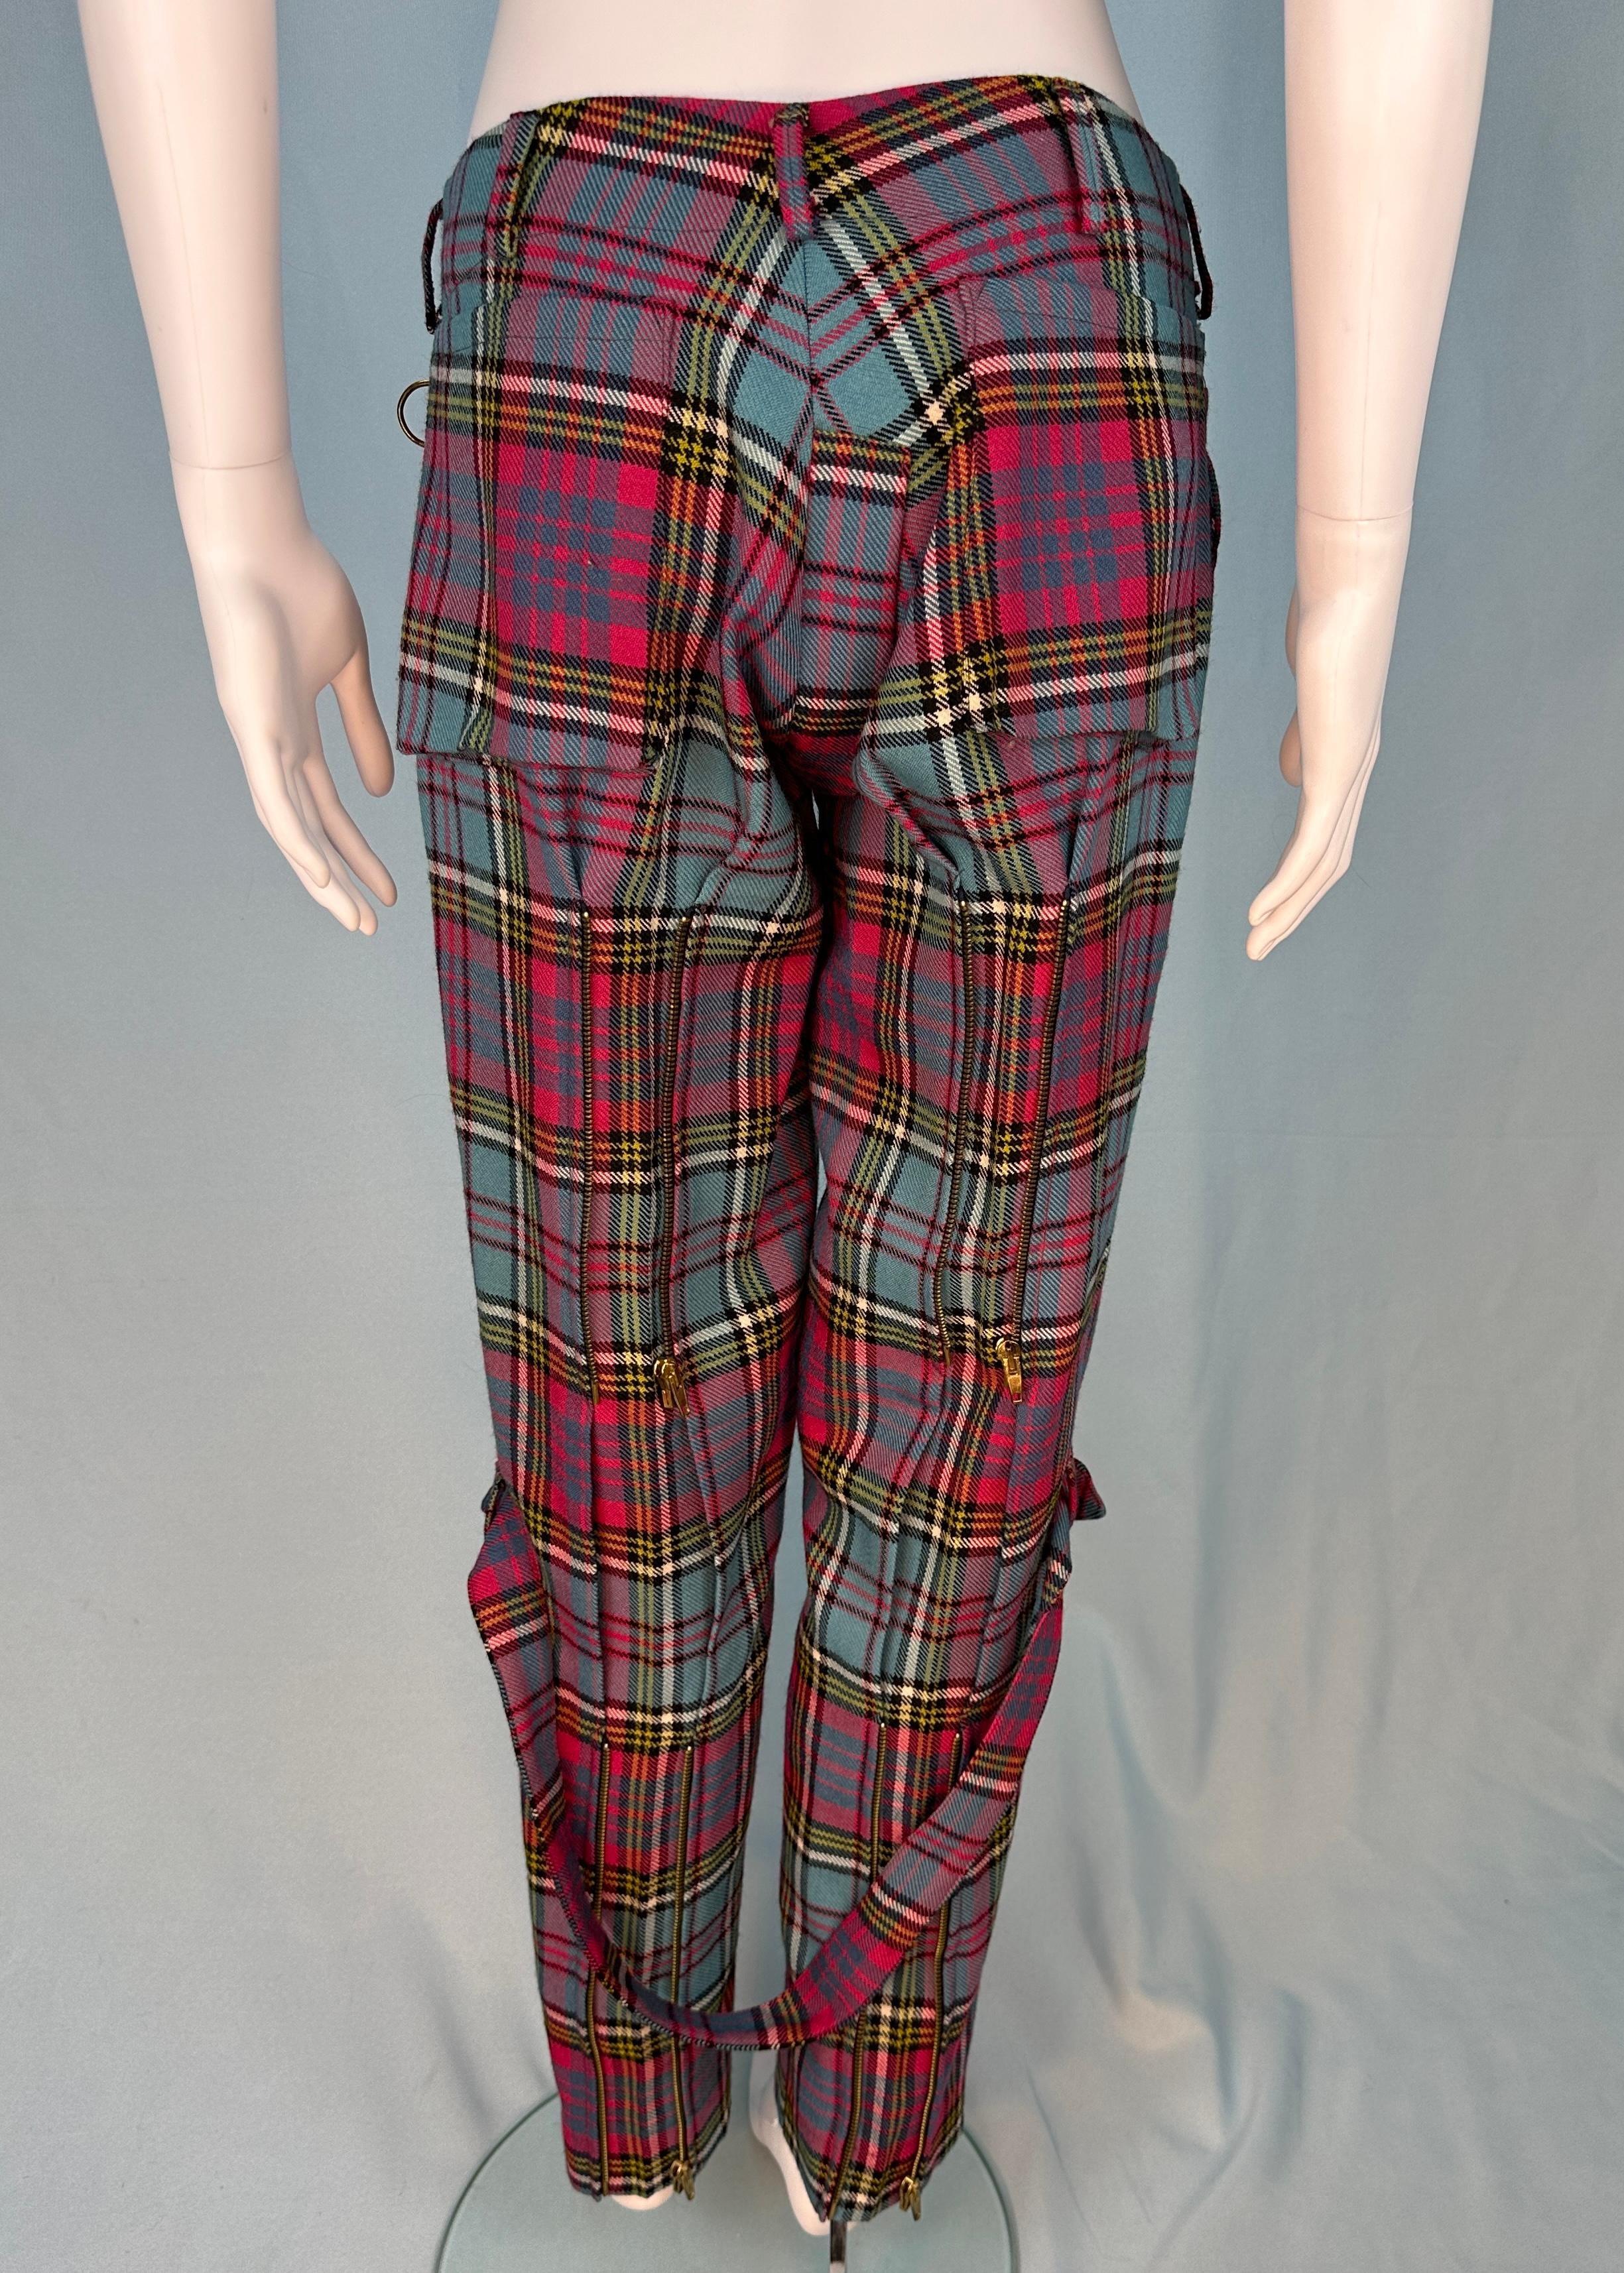 Vintage Vivienne Westwood
c. 1996

Menswear however small size so also suitable for women

MacAndreas tartan bondage pants
Two sets of zips on back of legs 
Removable strap between the legs 
100% wool
Satin lined Metal orb button 

Size UK 12 / US 8